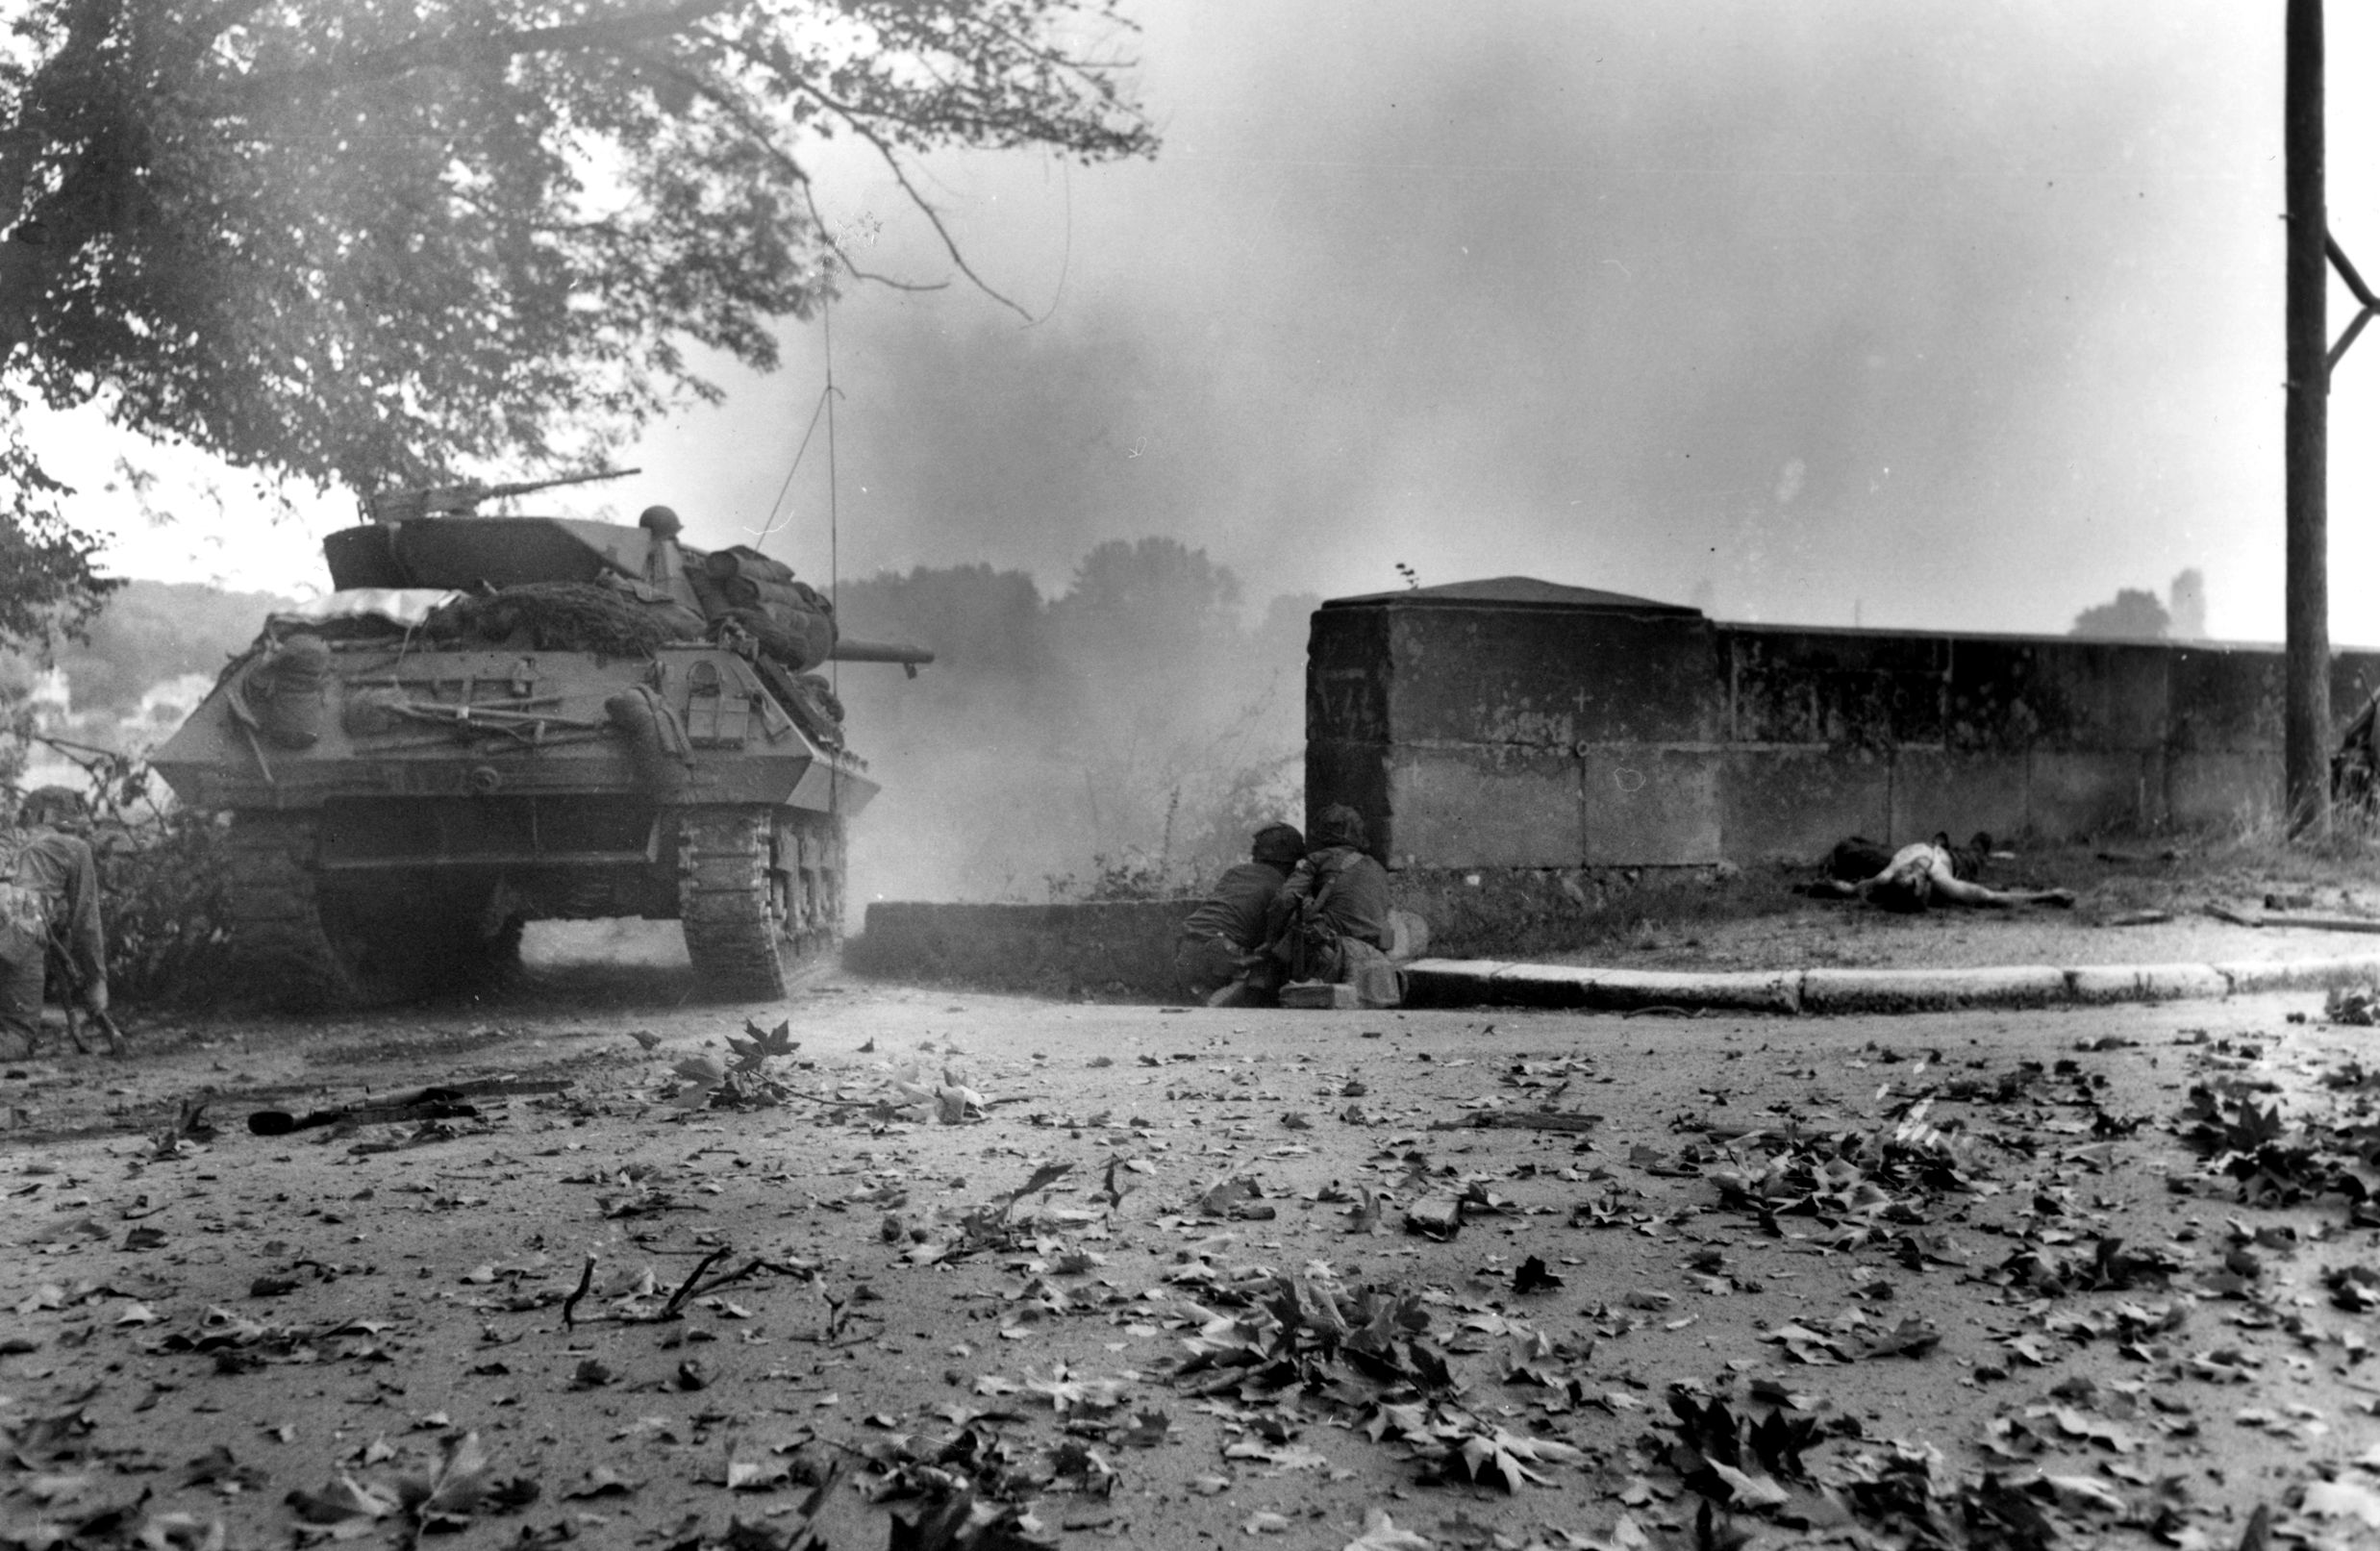 An American tank destroyer tentatively approaches the smoldering ruins of a Normandy town as accompanying infantrymen take cover from incoming German fire.